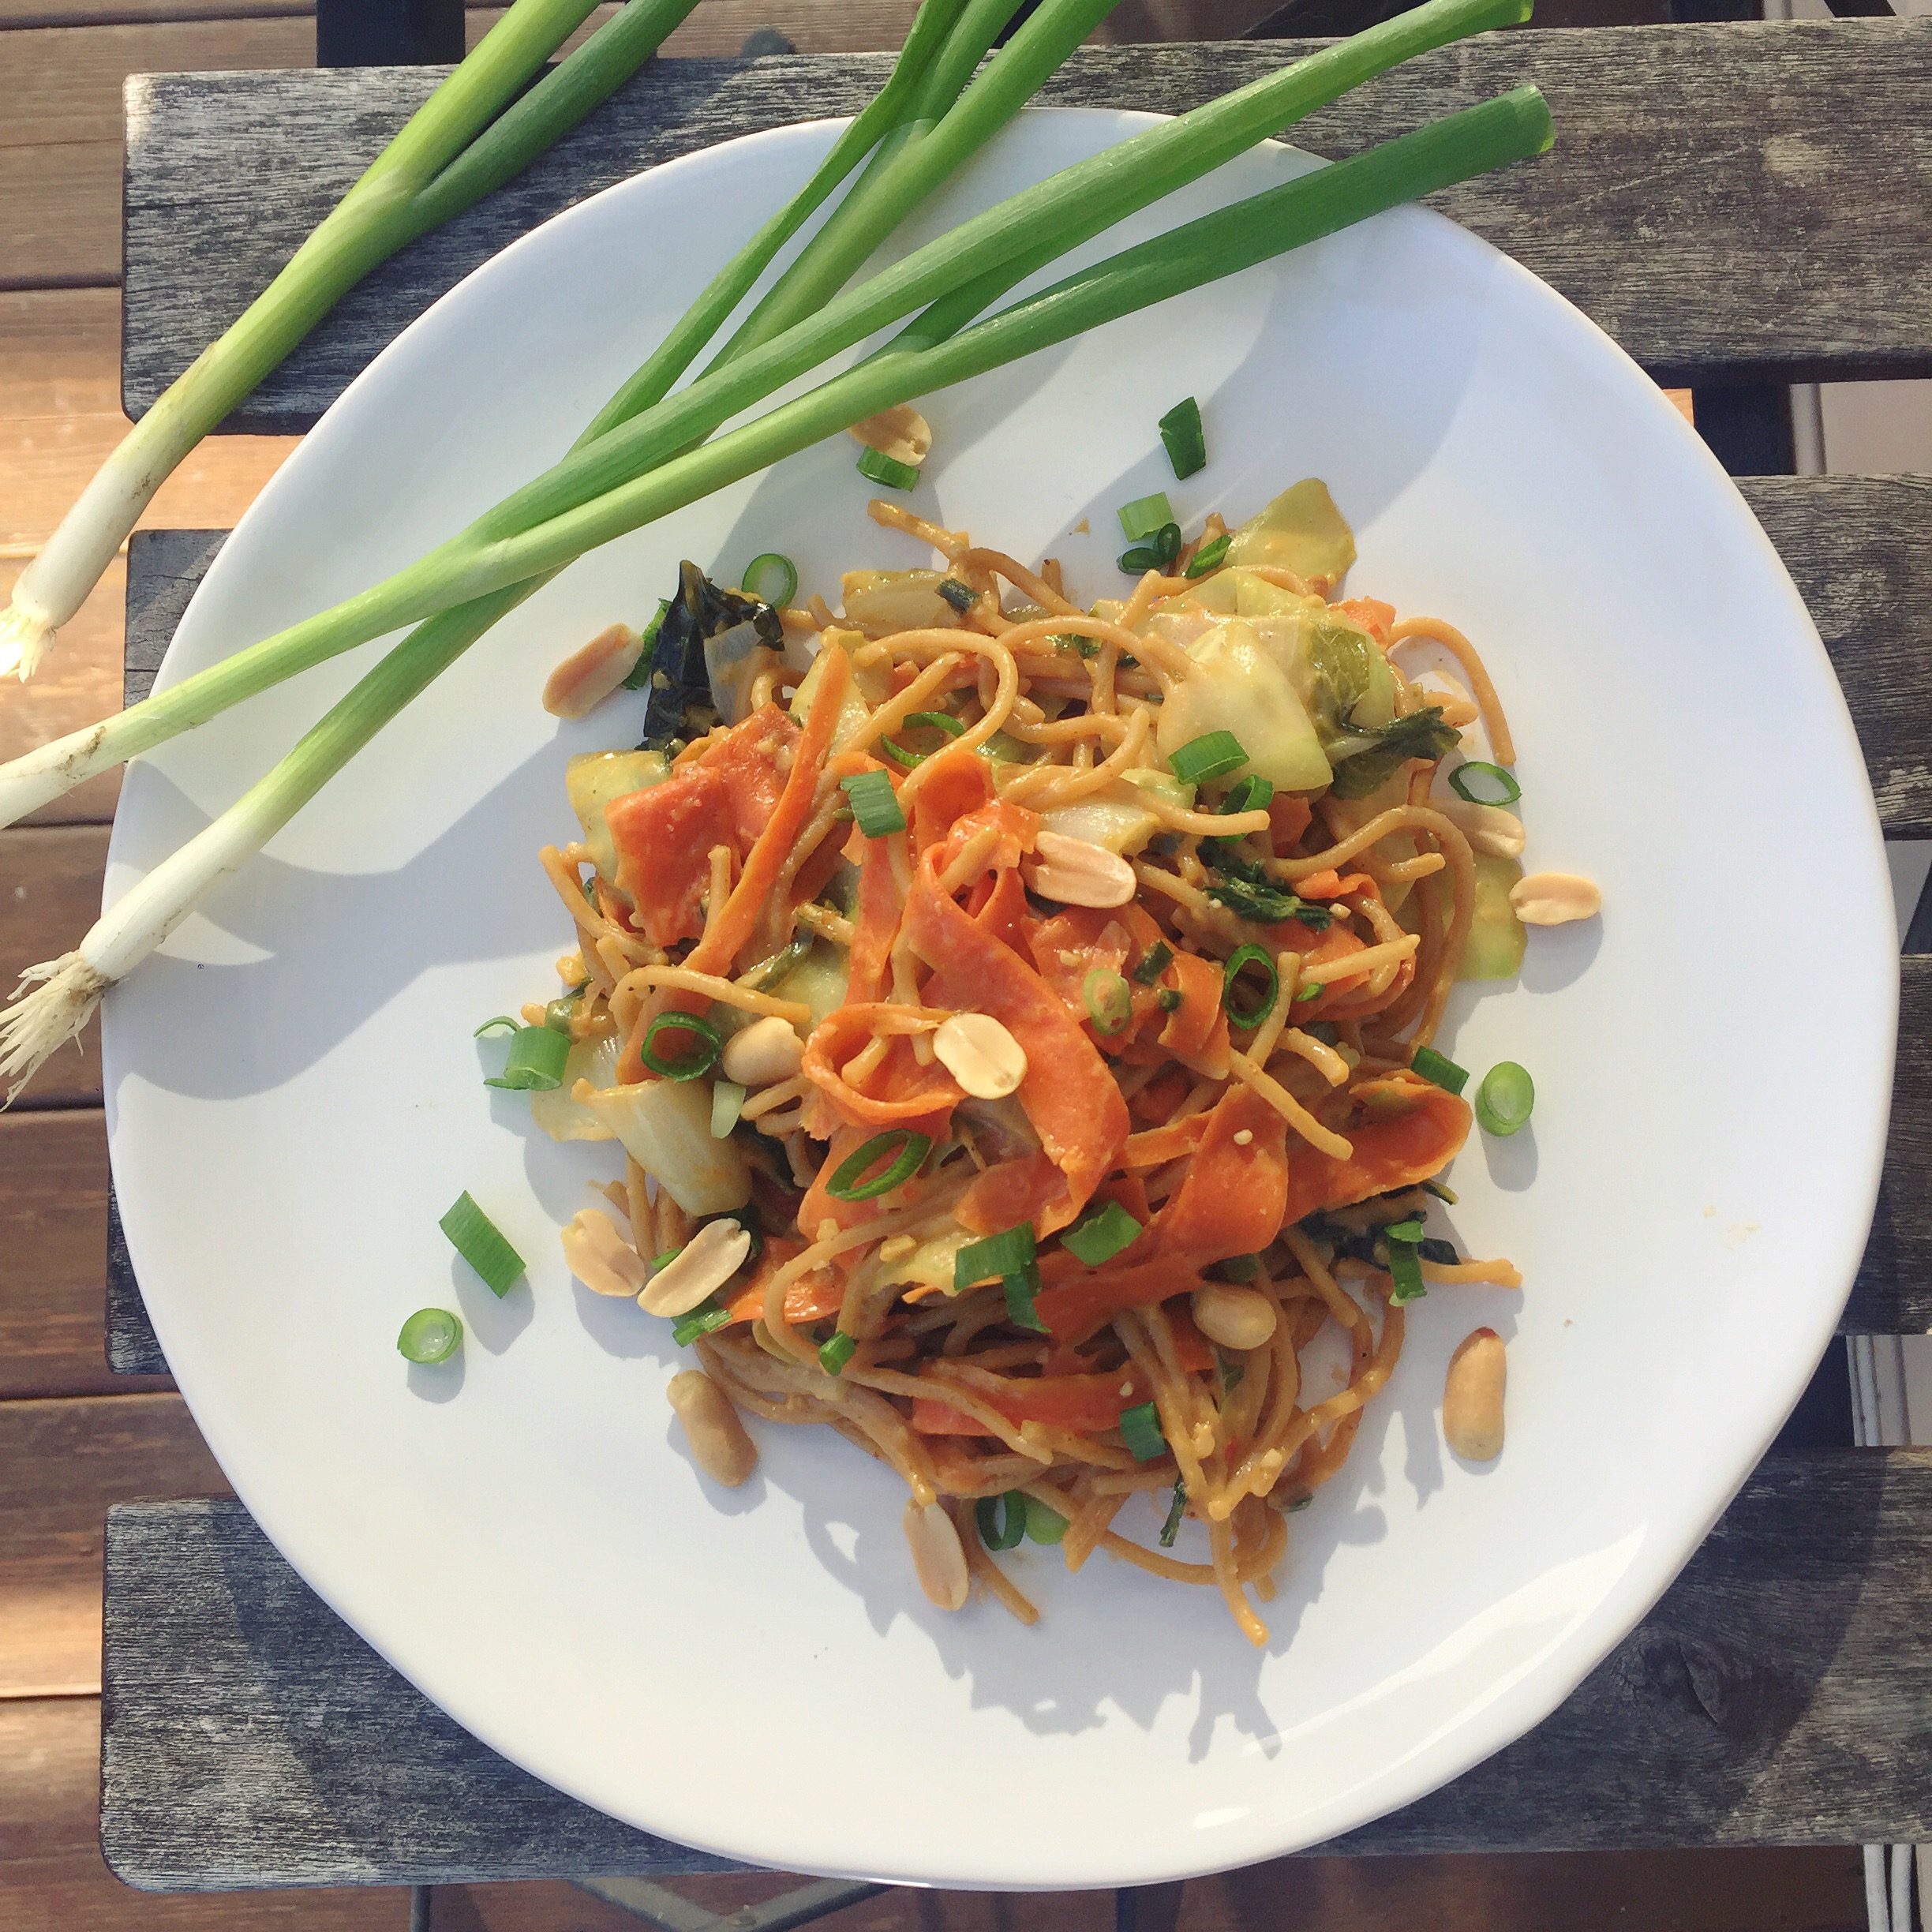 Asian Noodle Stir Fry with a peanut-chili sauce.